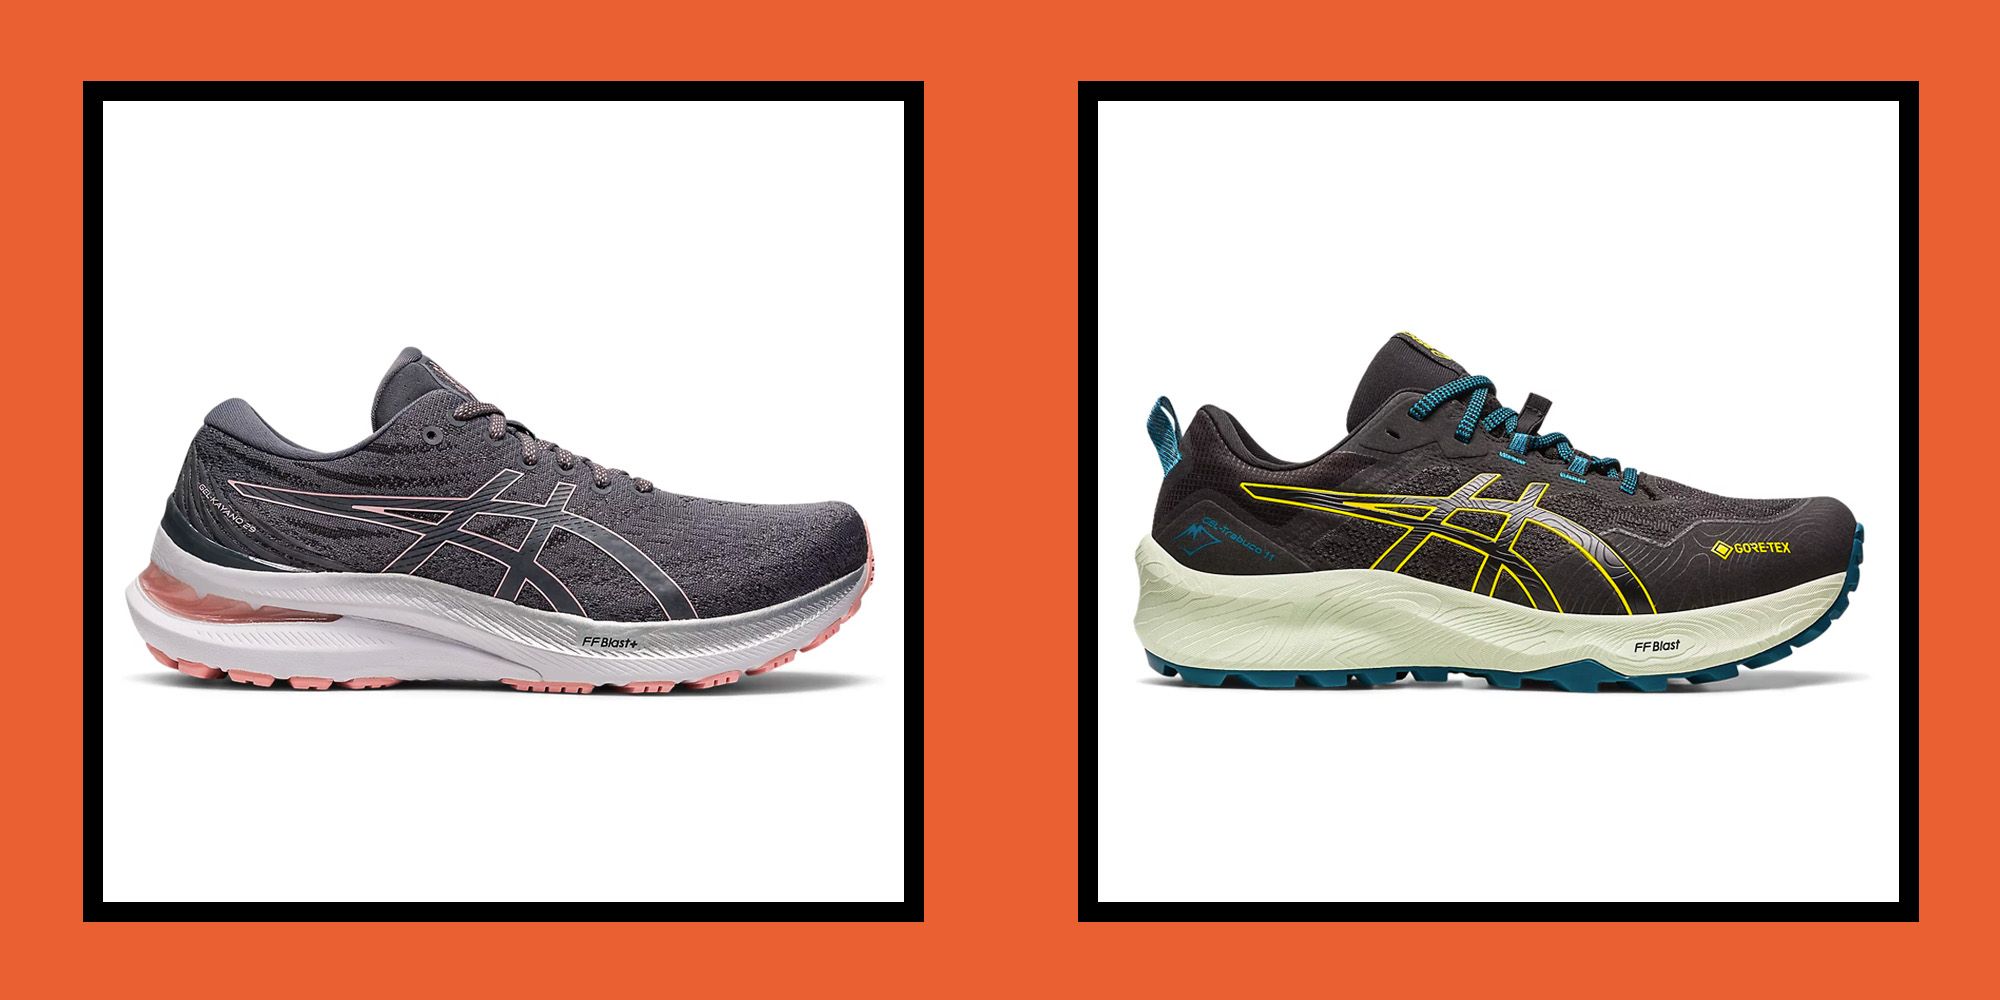 Got your eye on a pair of Asics running shoes? These are our favourites ...